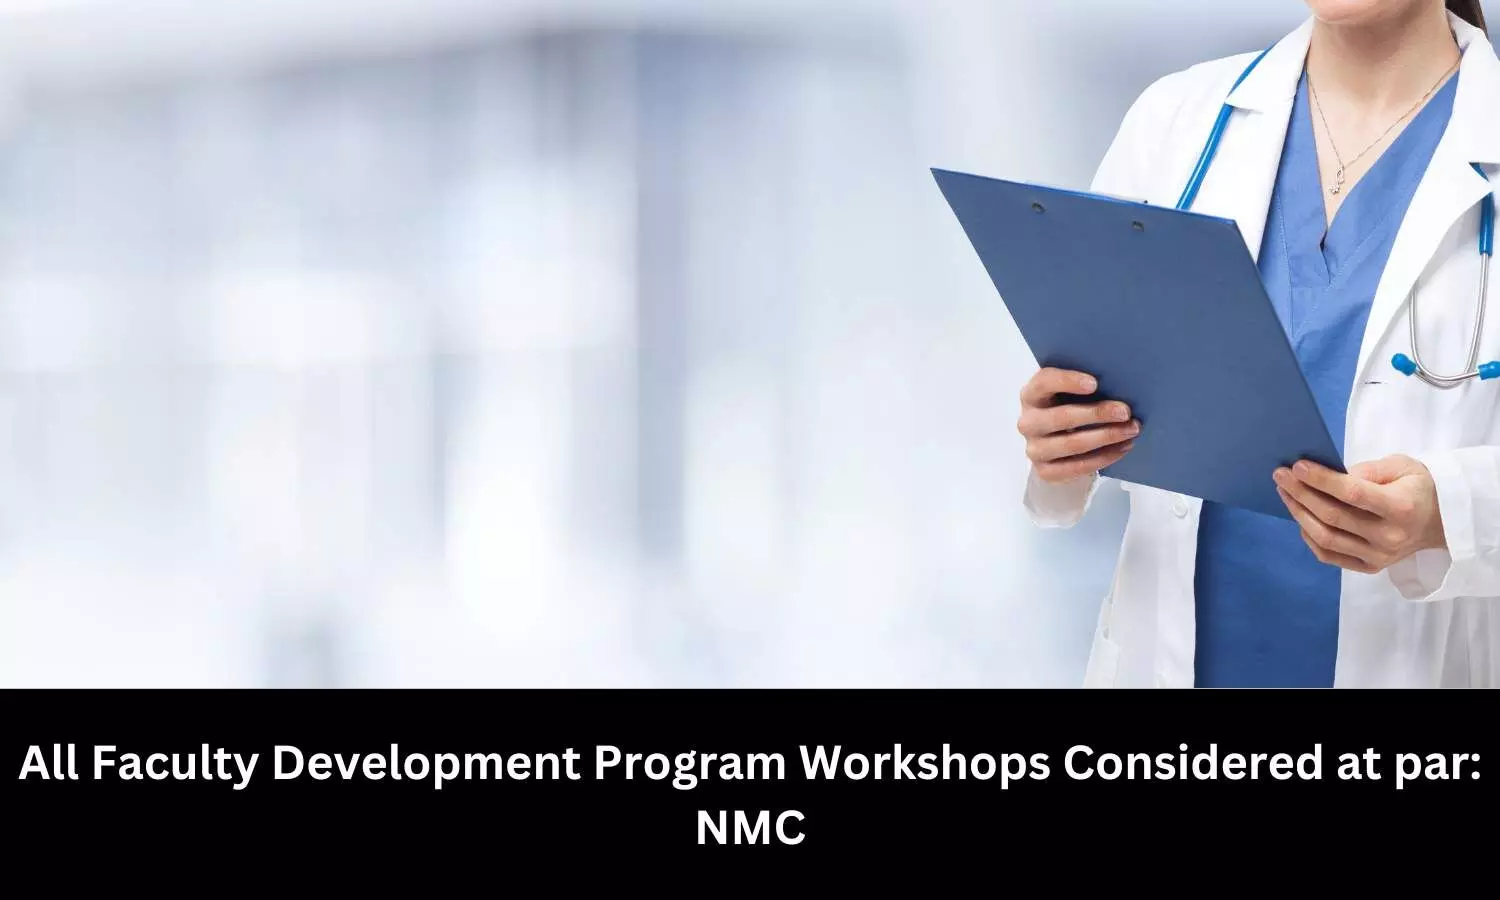 All Faculty Development Program Workshops Considered at par, confirms NMC